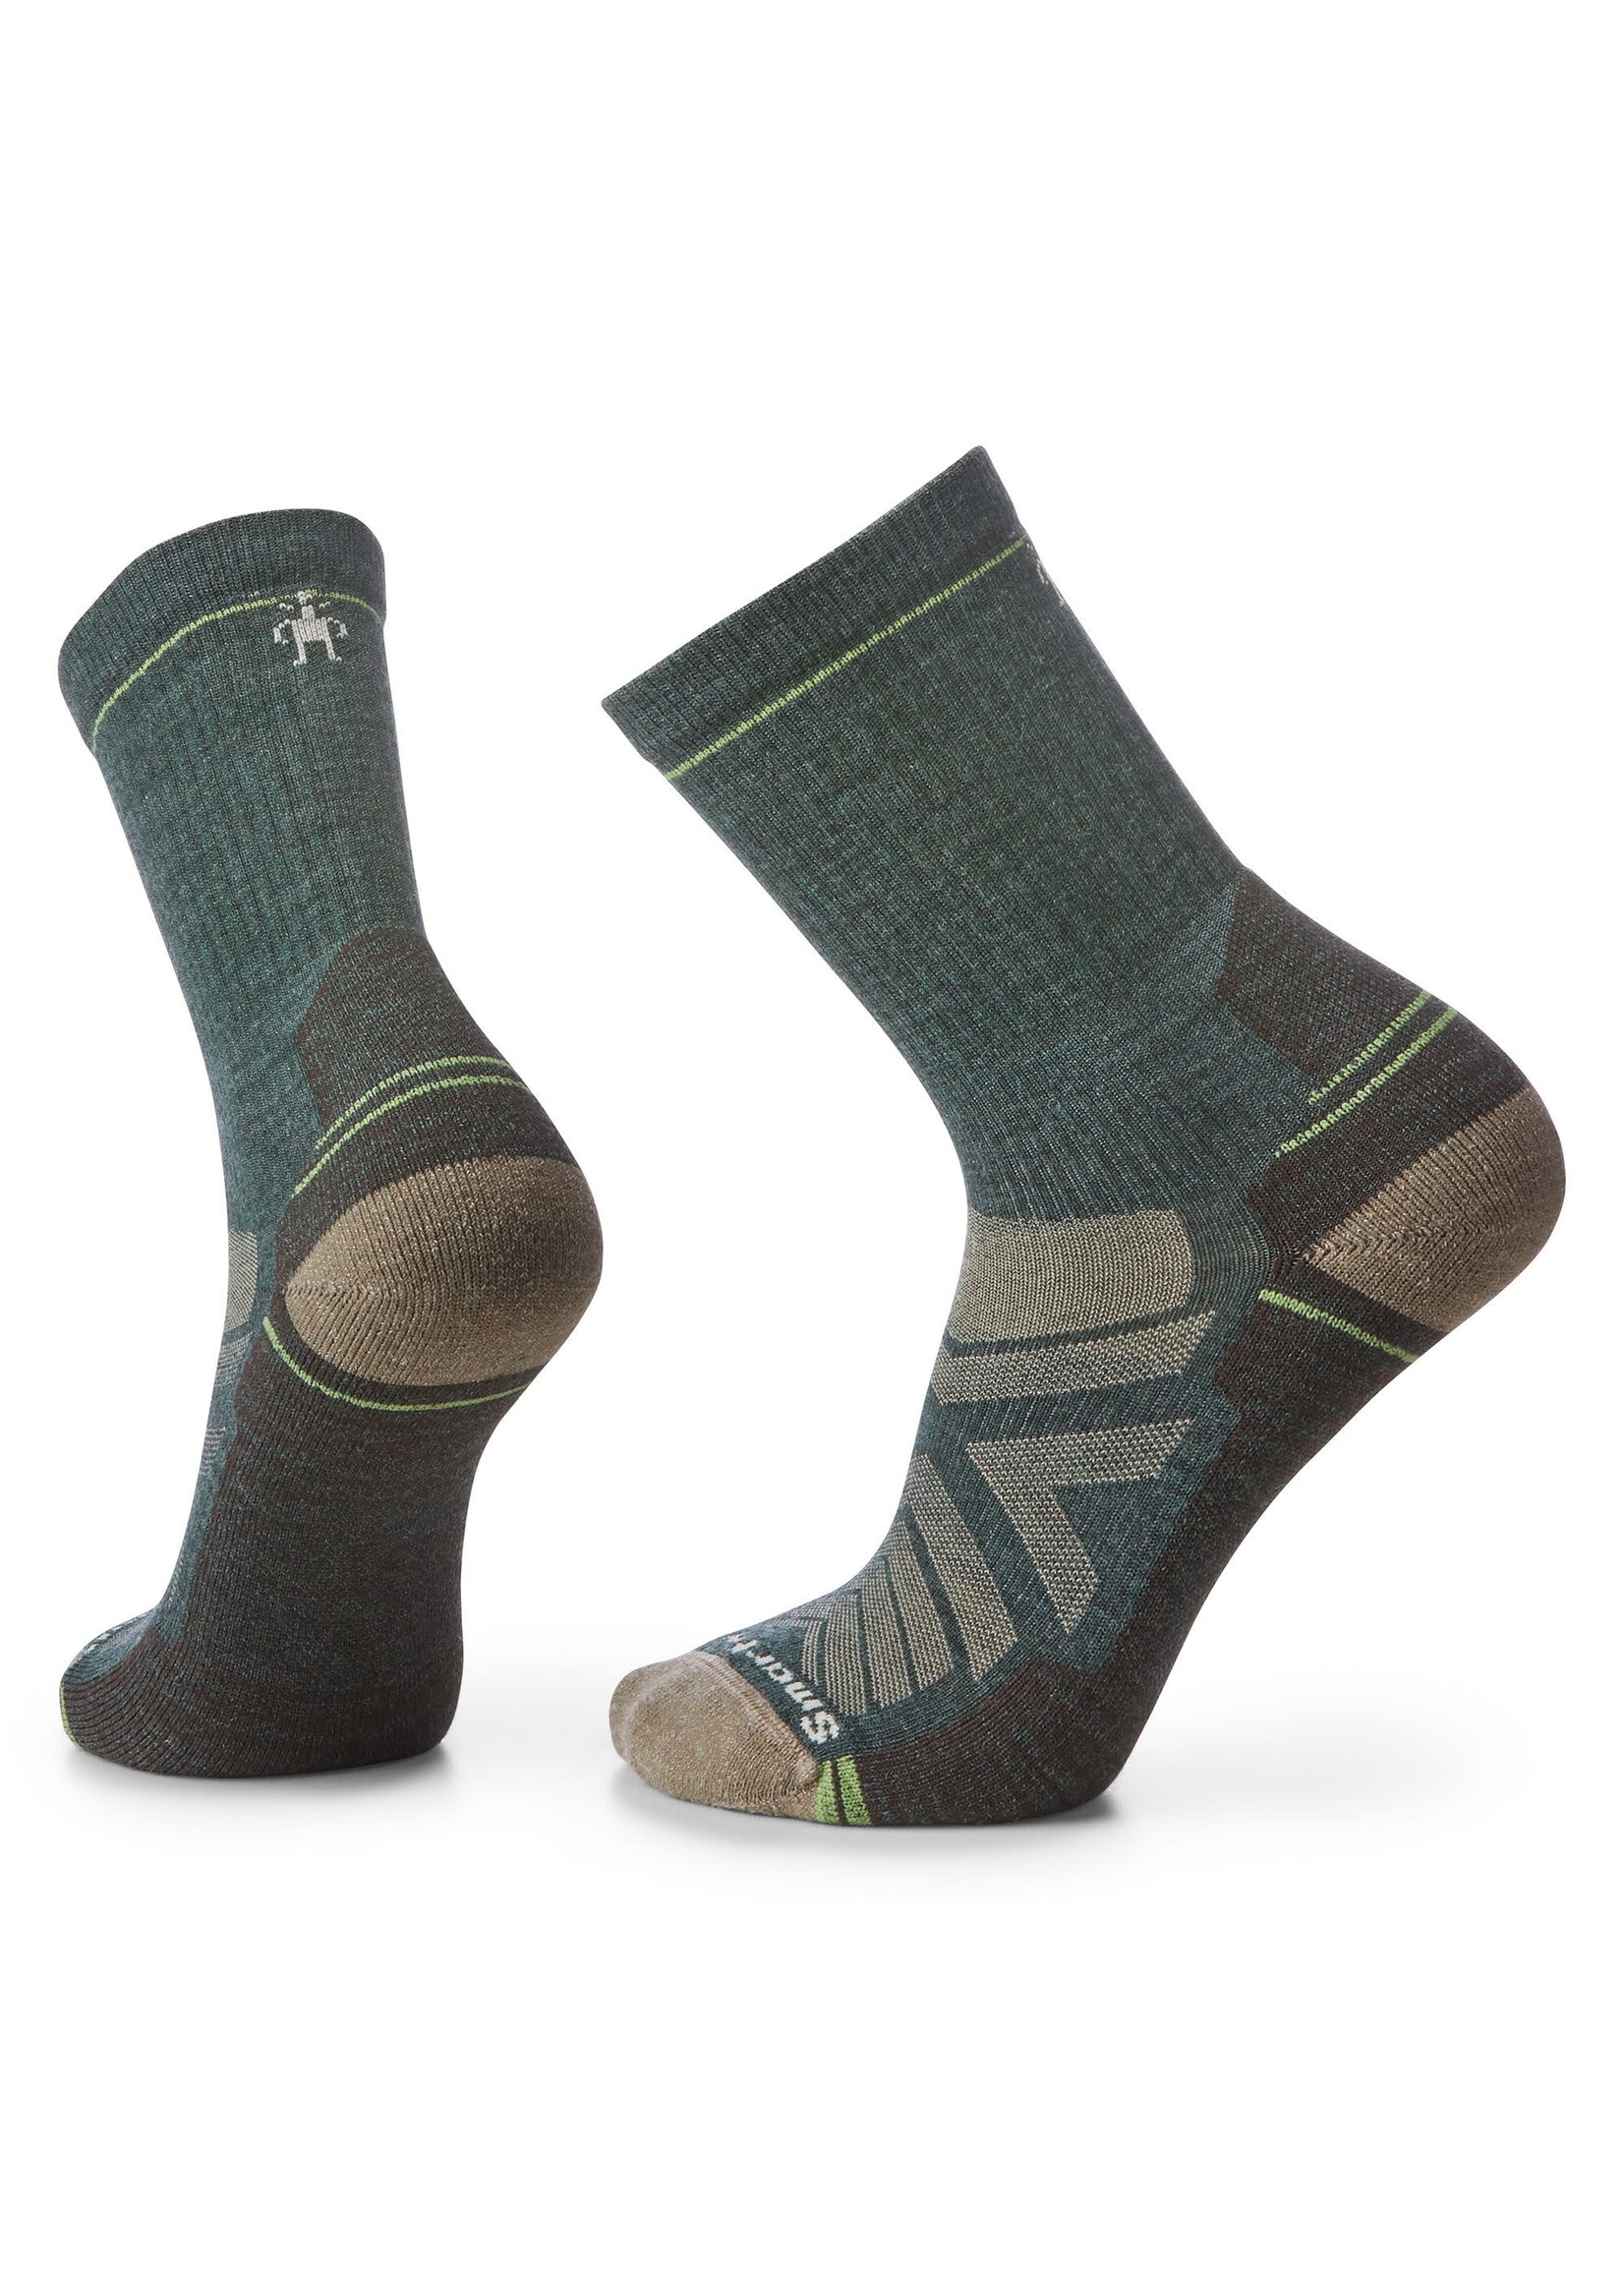 Smartwool Chaussette Smartwool Hike Light Cushion Crew - Homme